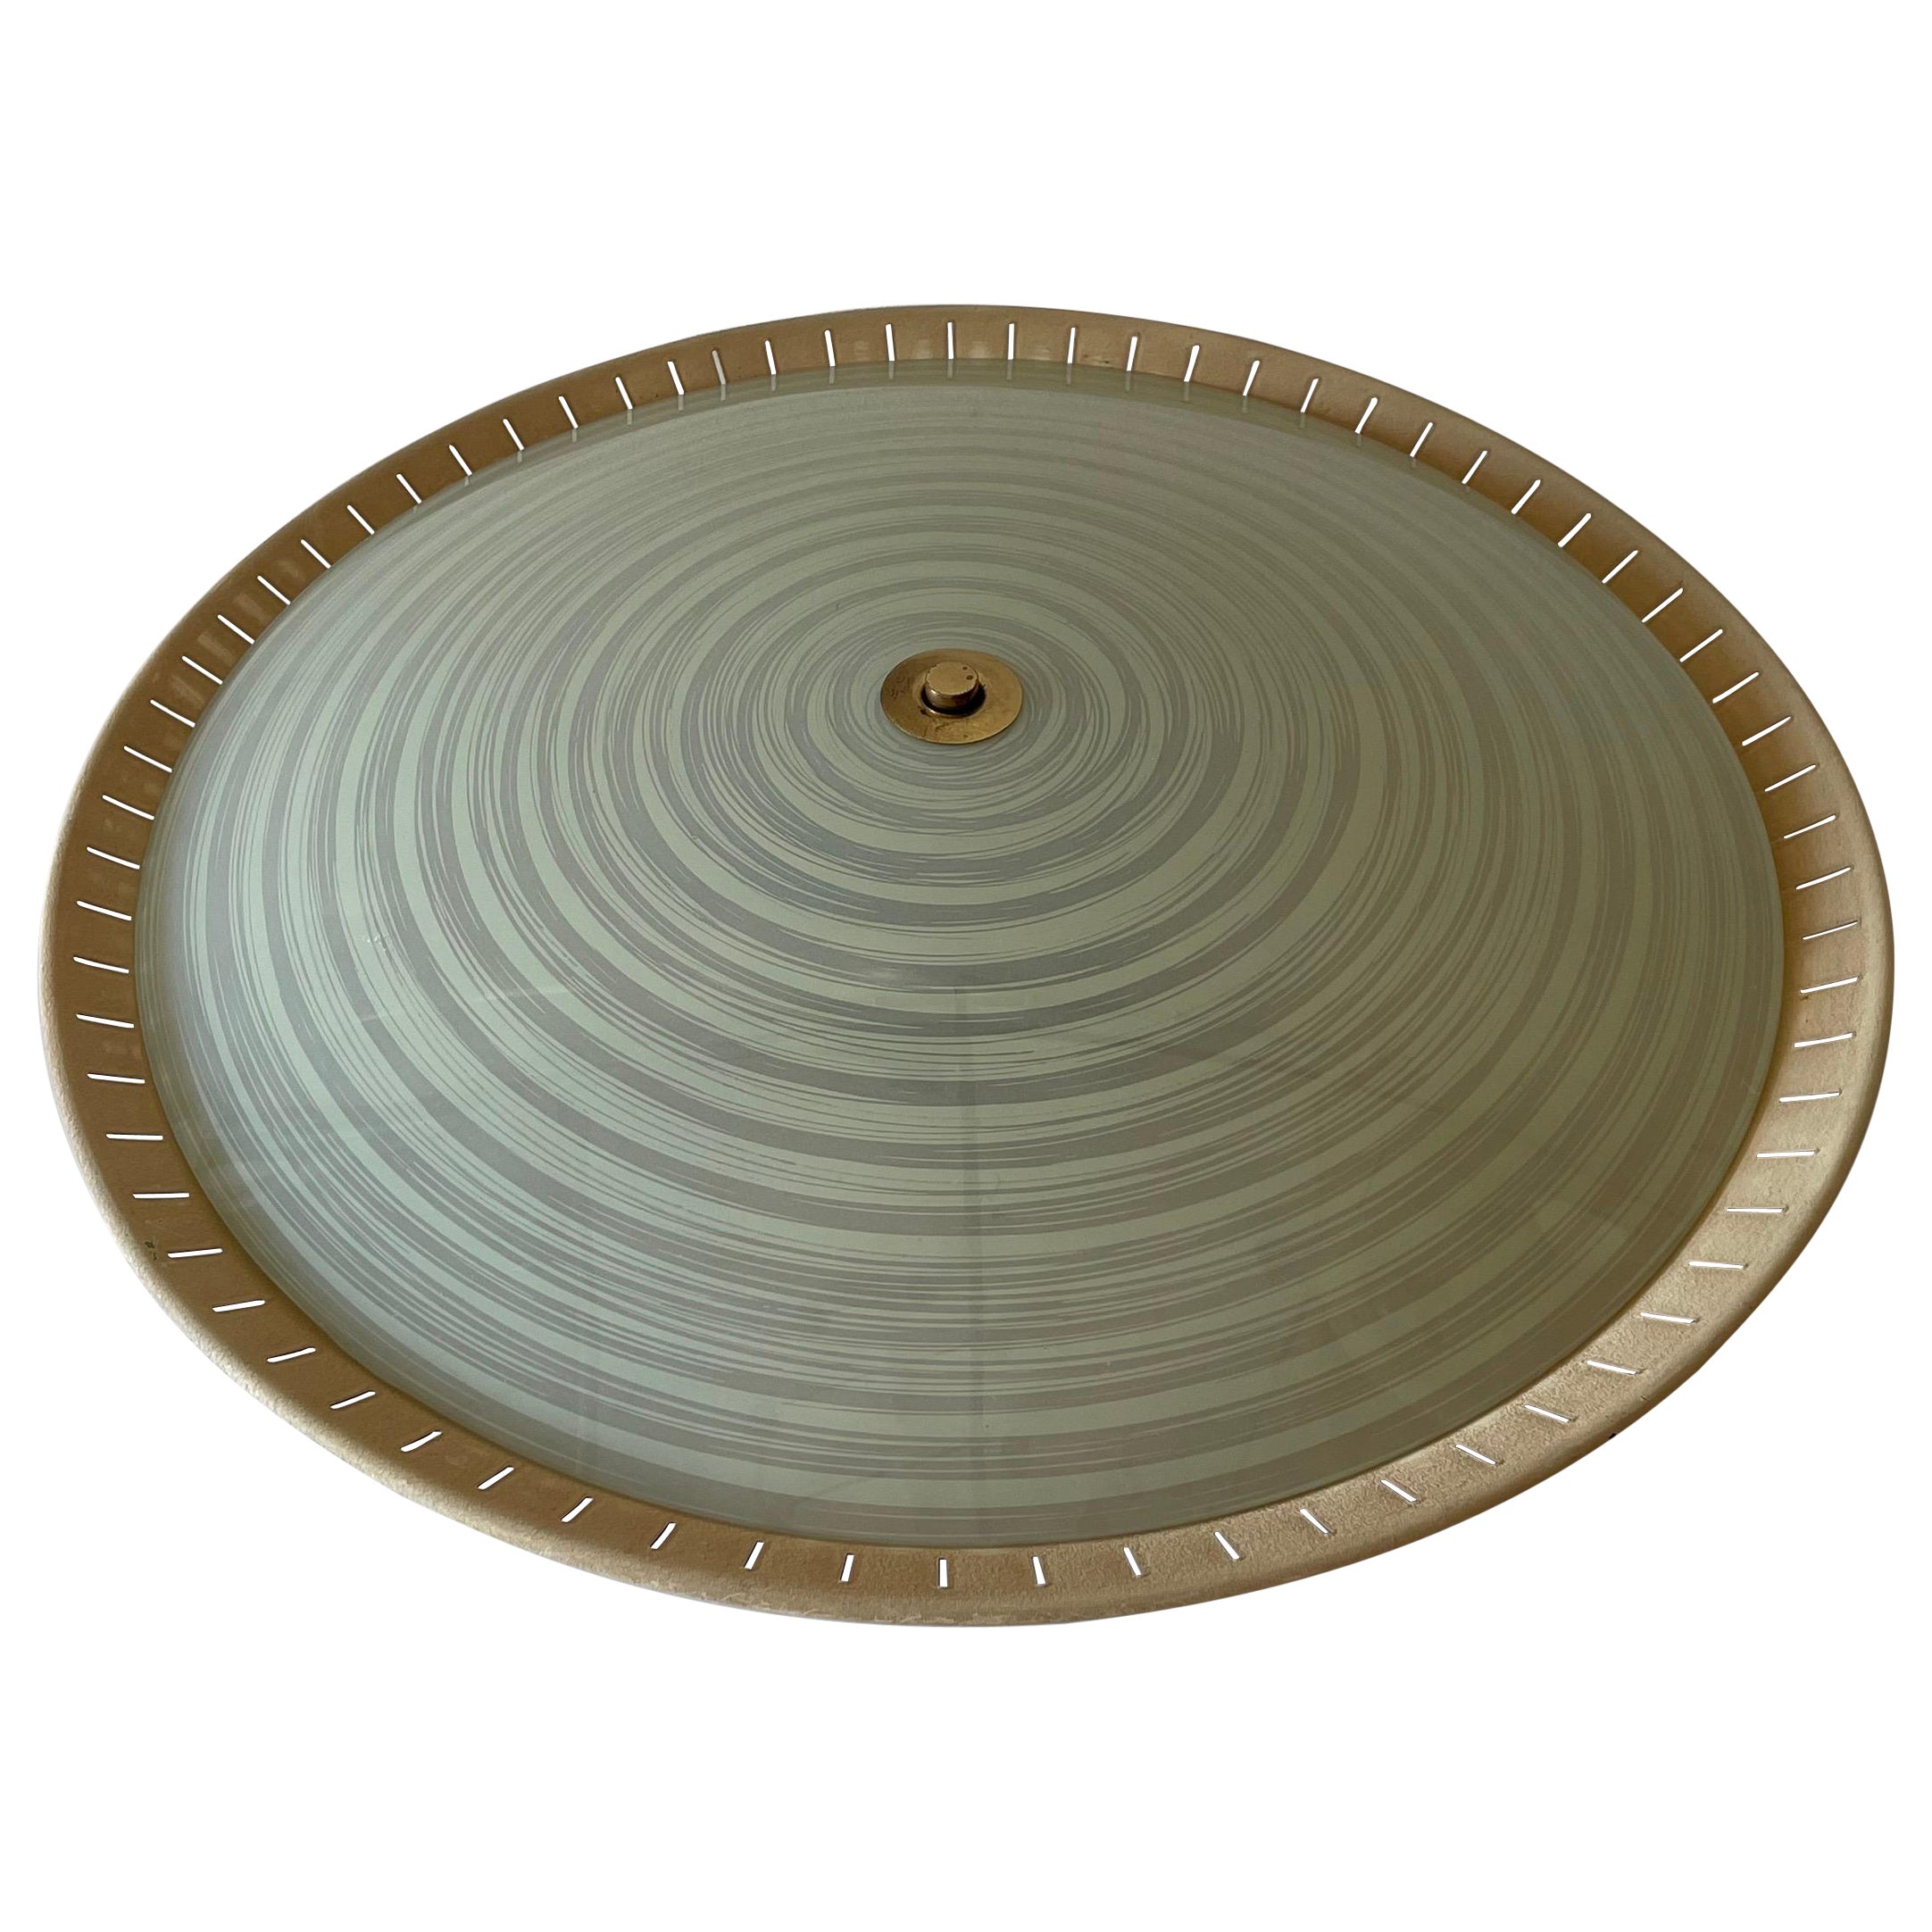 Ufo Design Large Flush Mount Ceiling Lamp by Hillebrand, 1950s, Germany For Sale